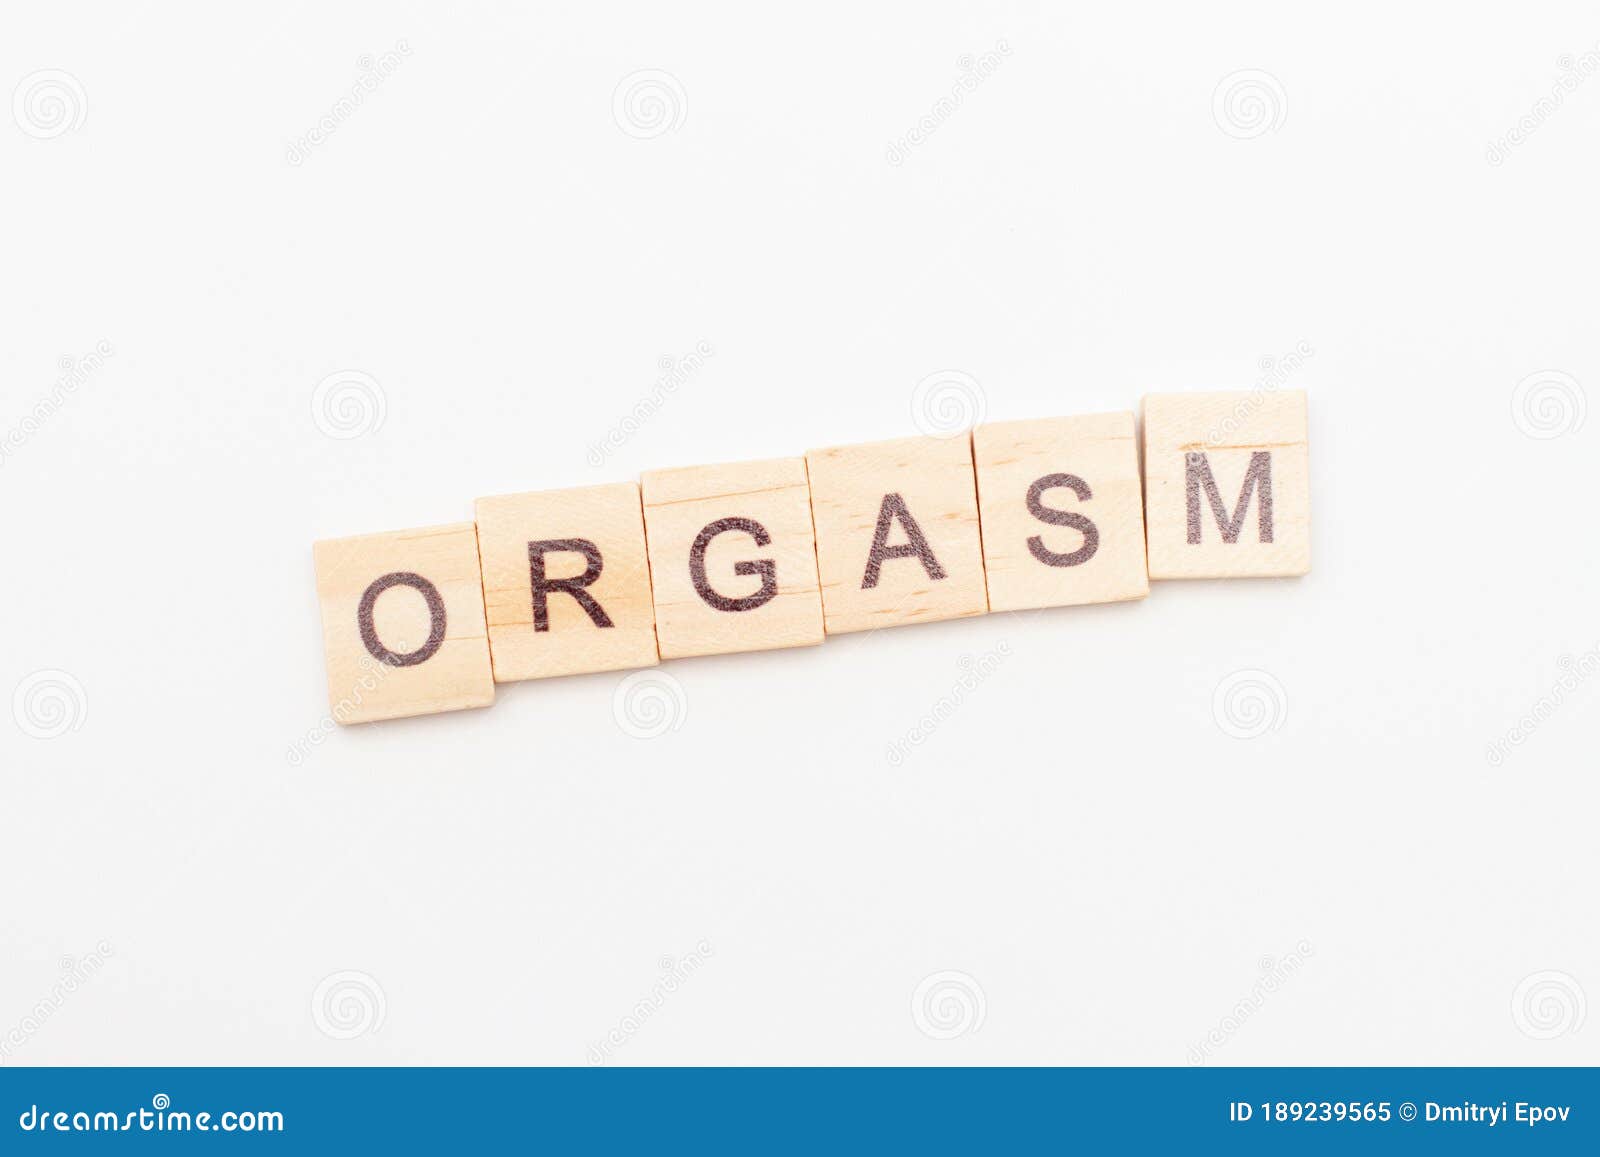 Inscription Orgasm Made Of Letters On Wooden Blocks Sex Education